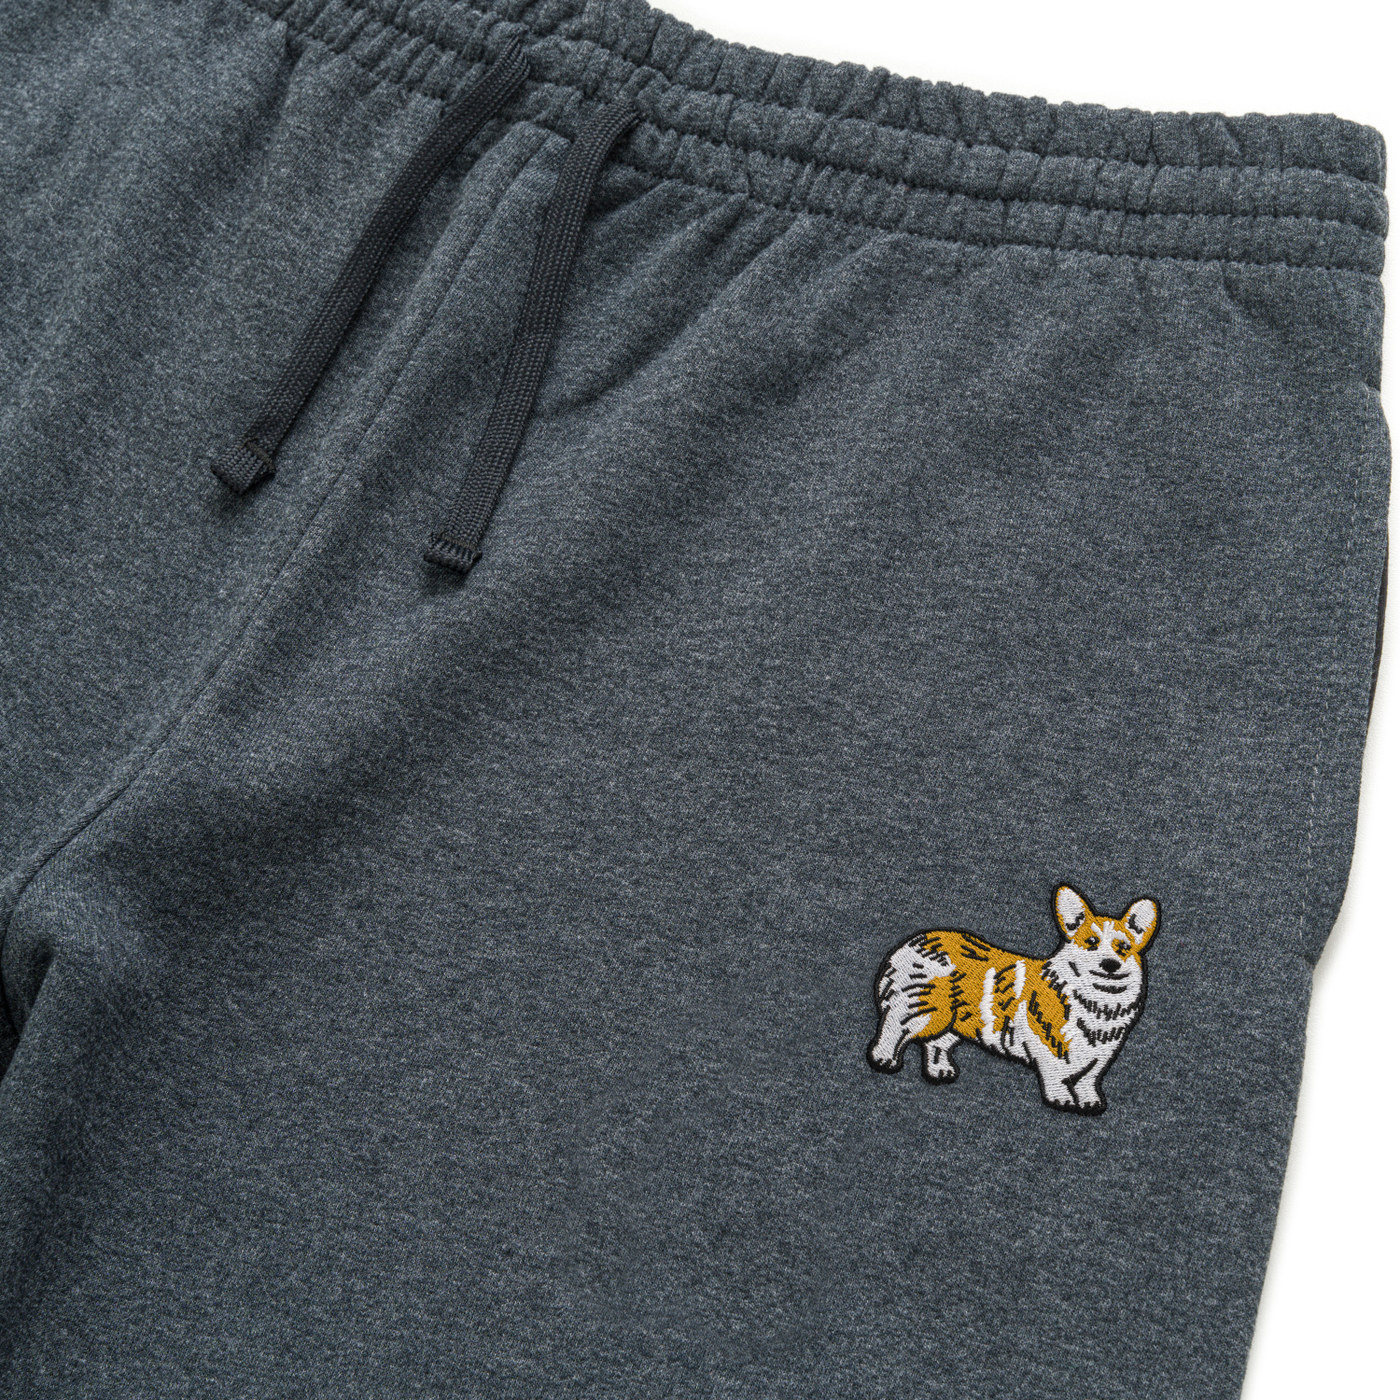 Bobby's Planet Unisex Embroidered Corgi Joggers from Paws Dog Cat Animals Collection in Black Heather Color#color_black-heather